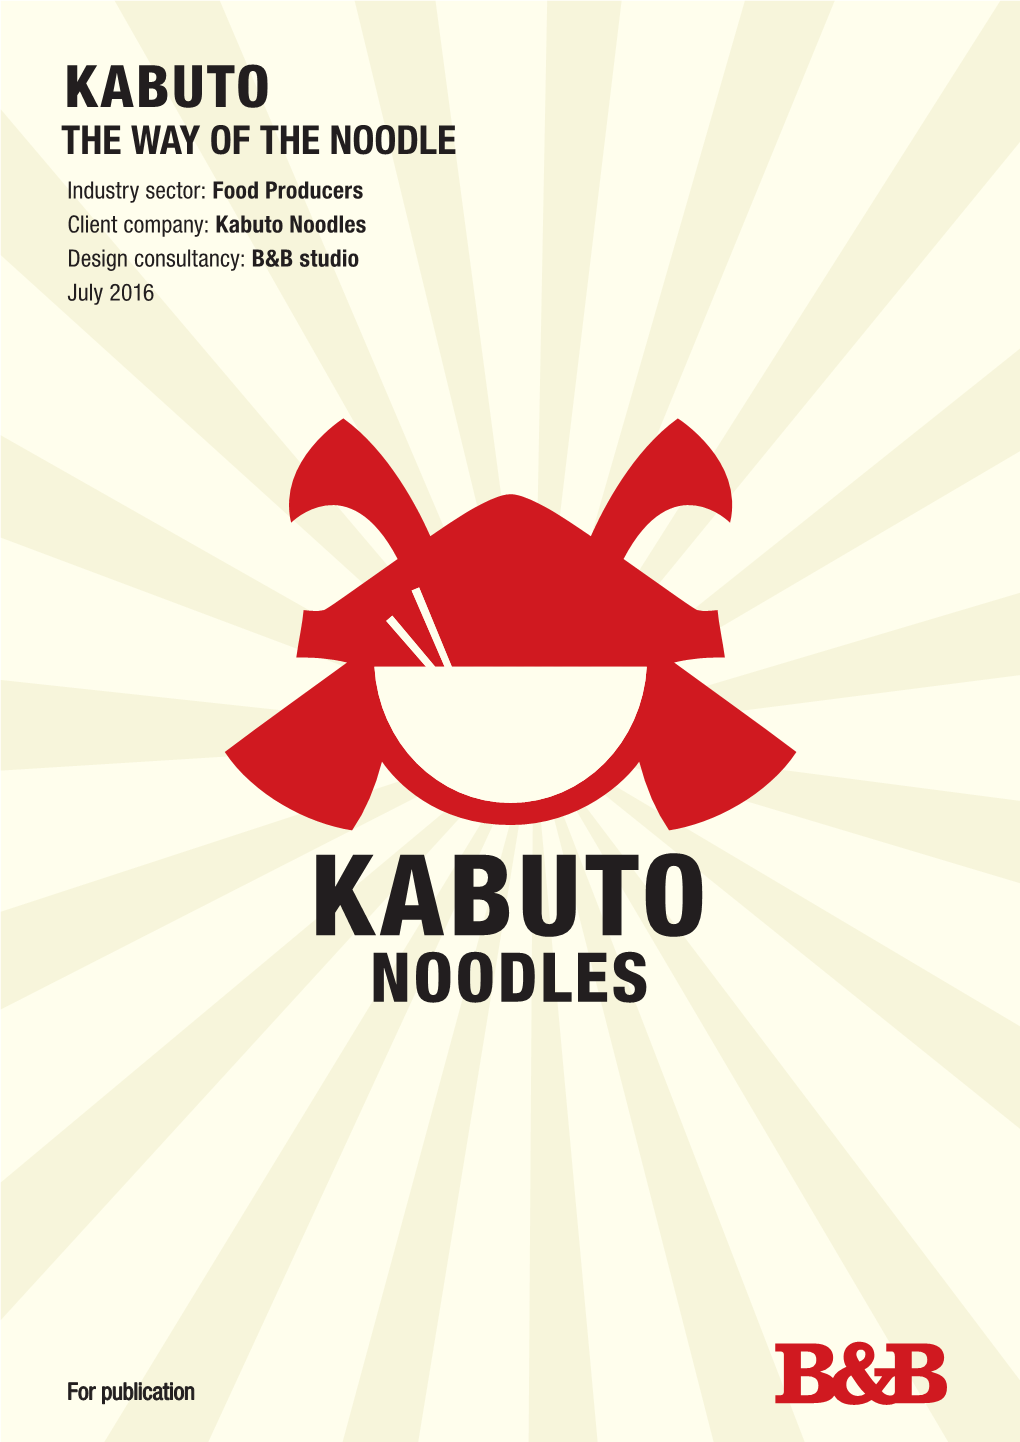 THE WAY of the NOODLE Industry Sector: Food Producers Client Company: Kabuto Noodles Design Consultancy: B&B Studio July 2016